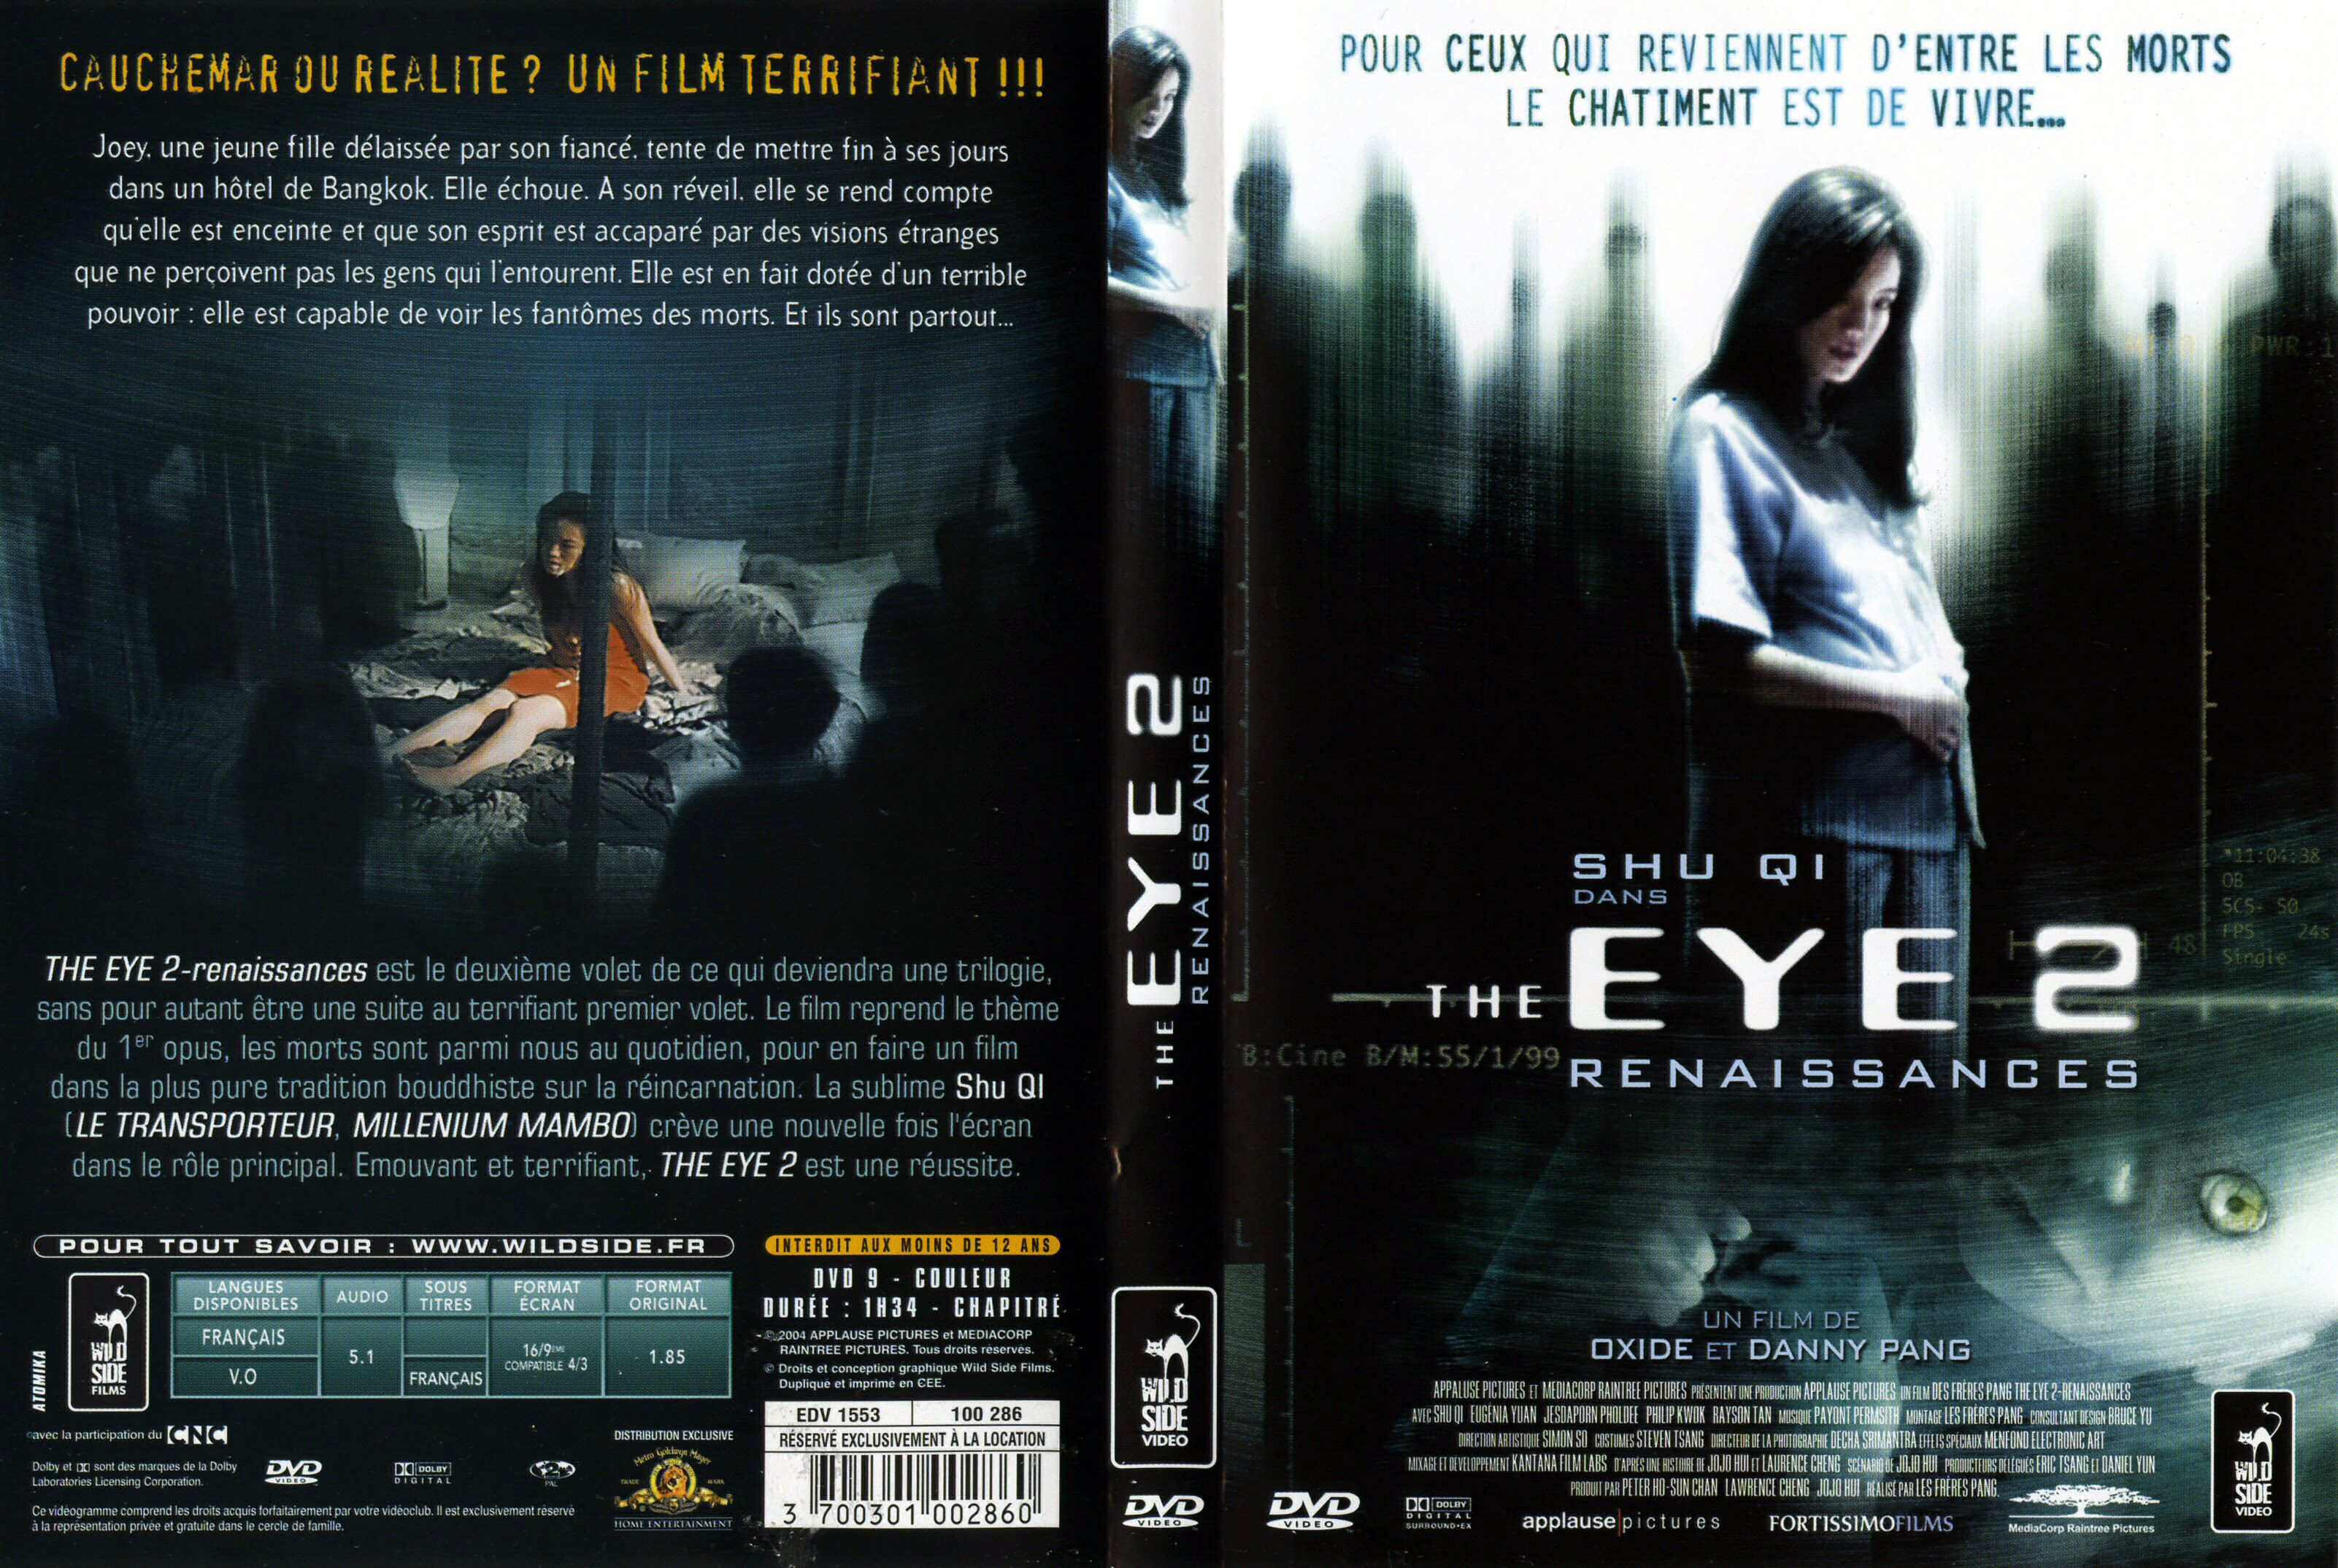 Jaquette DVD The eye 2